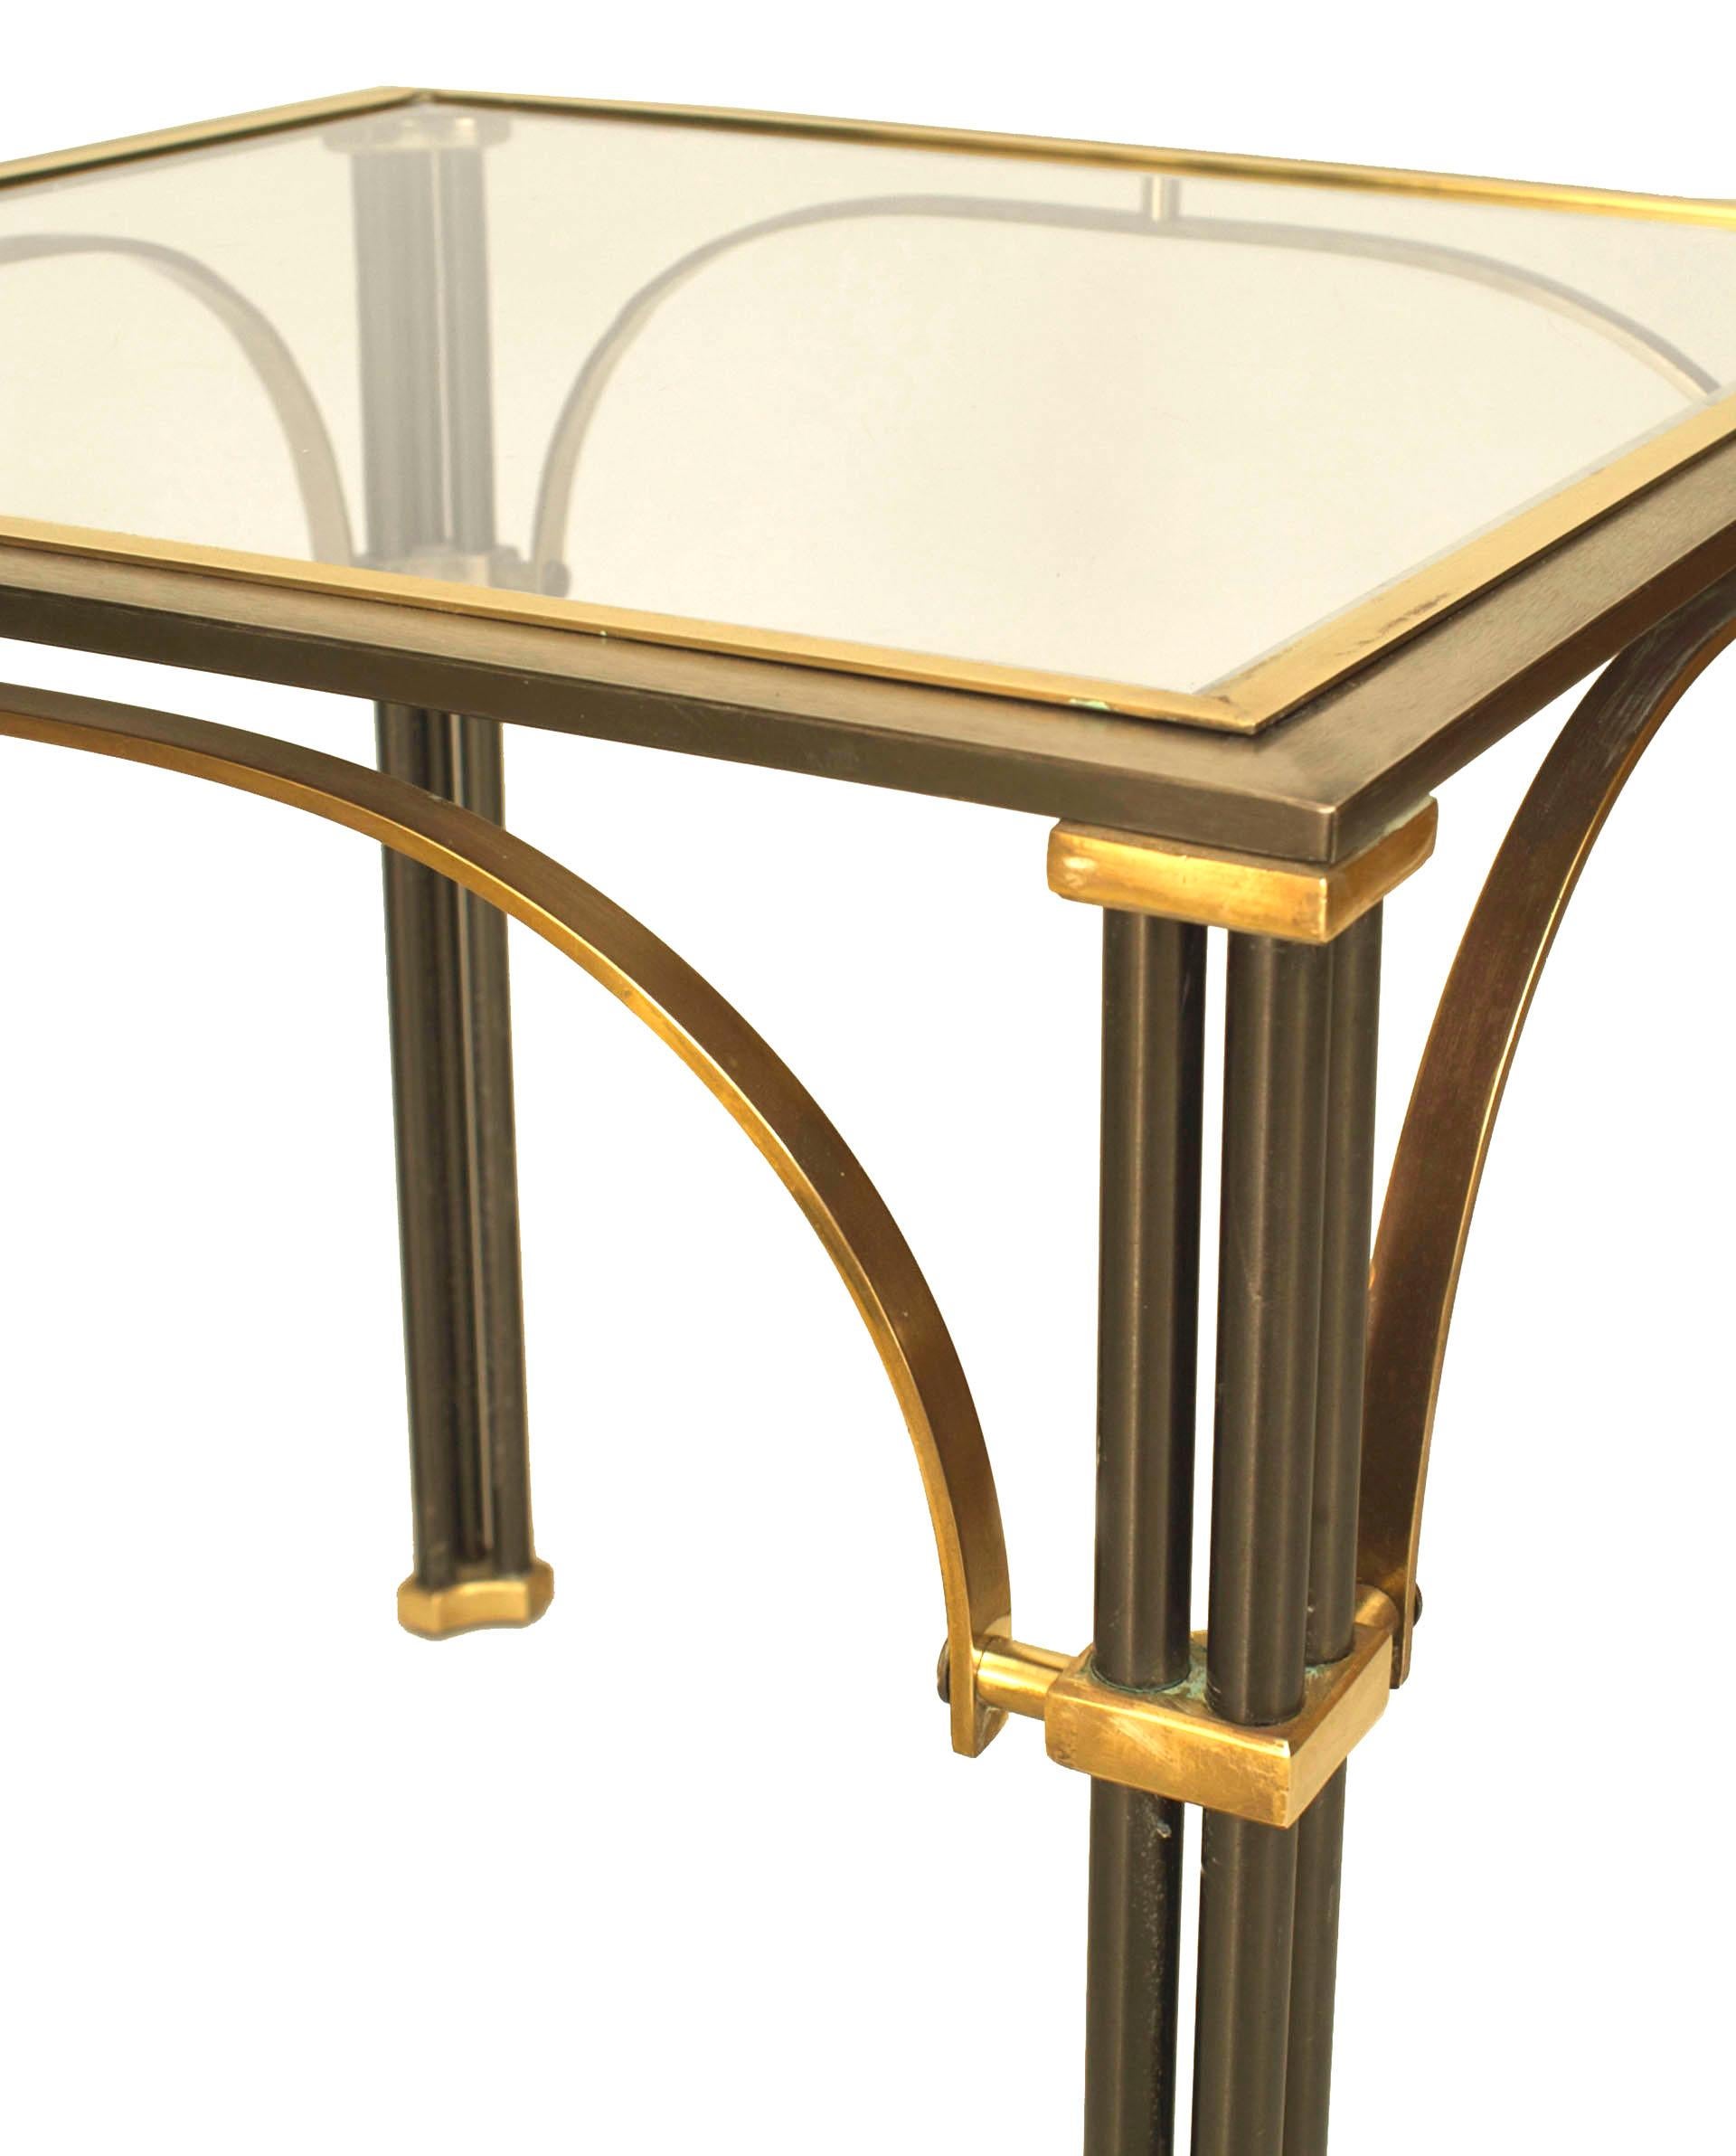 French Mid-Century (1950s) steel low square end table with a cluster leg design and brass trim supporting a glass top. (Attributed to MAISON JANSEN)
